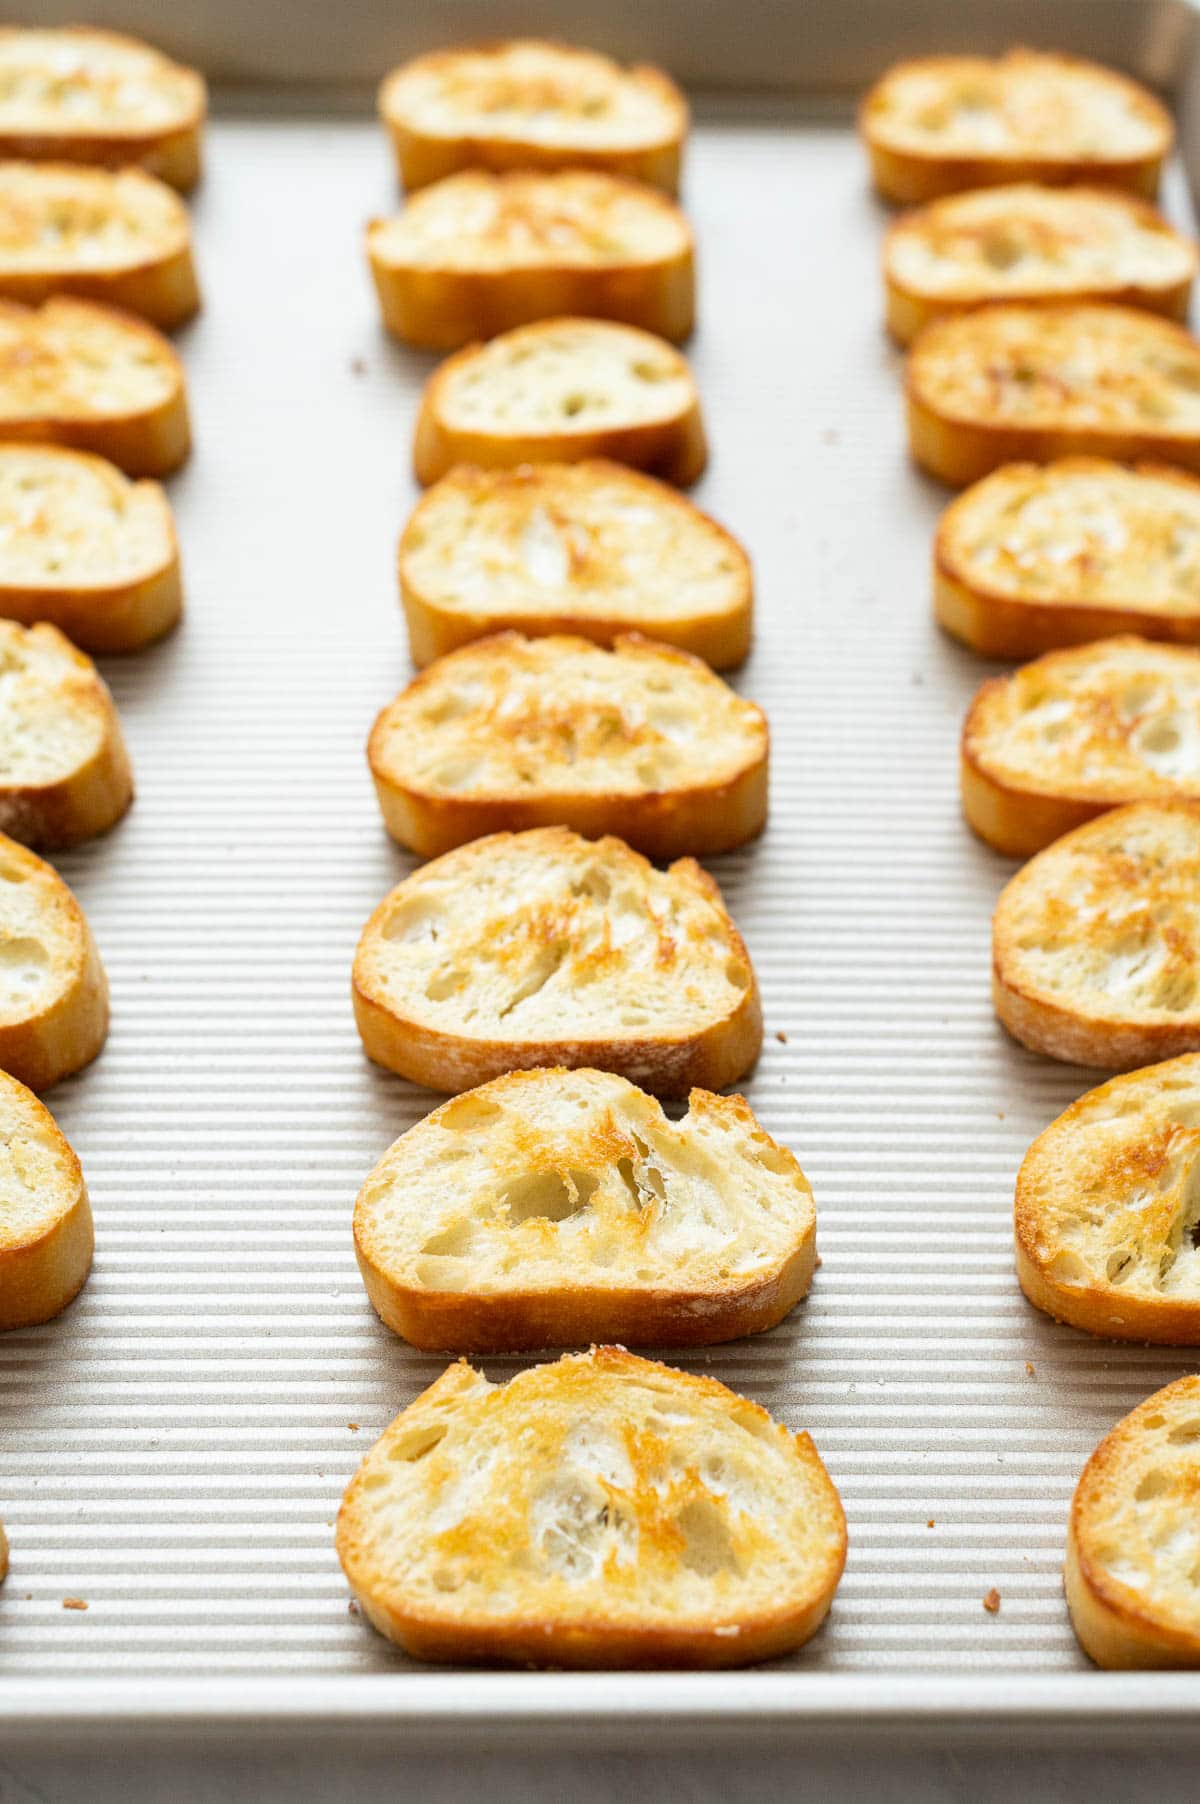 Lined up in rows baked crostini on a baking sheet.